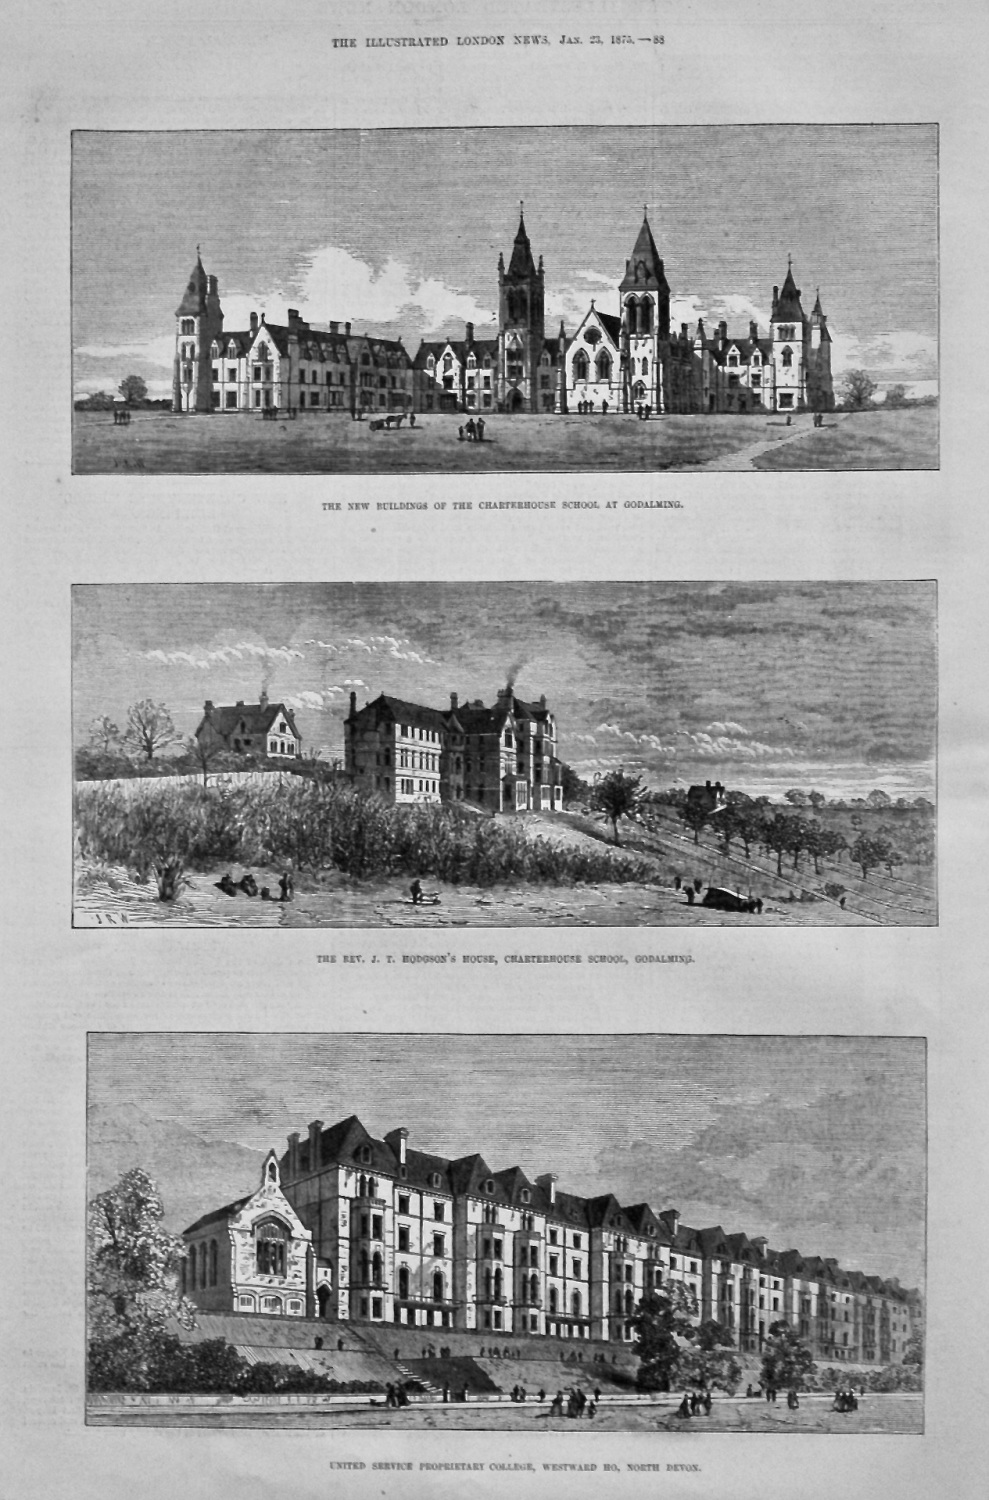 The New Buildings of the Charterhouse School, at Godalming. 1875.